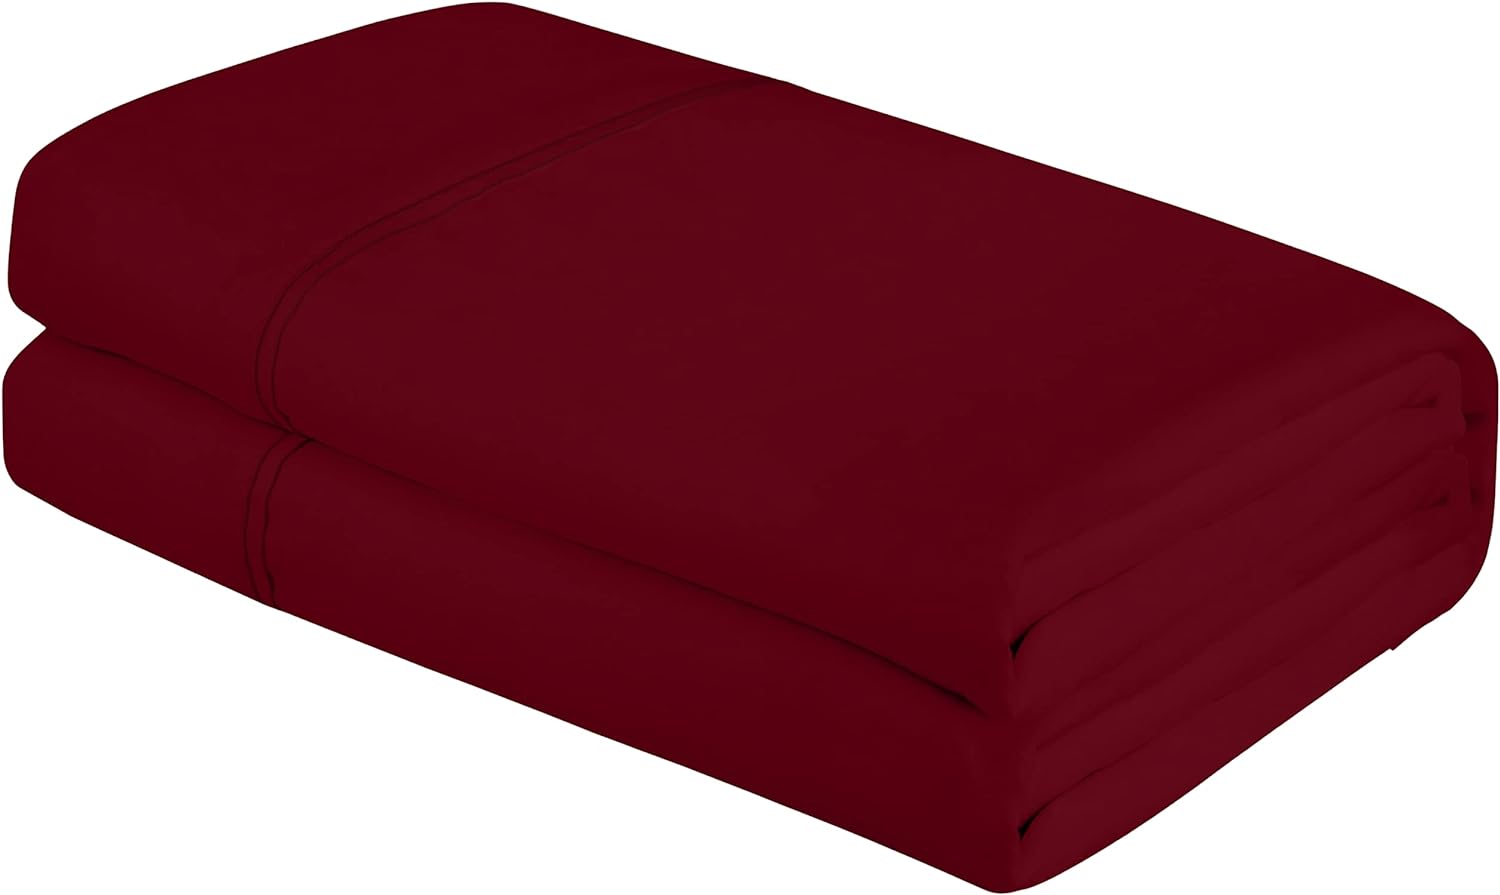 Royale Linens Full Size Flat Sheet Only - Brushed 1800 Microfiber - Ultra Soft & Breathable - Wrinkle & Stain Resistant - Hotel Quality Flat Sheet Sold Separately - Top Sheet for Bed (Full, Burgundy)